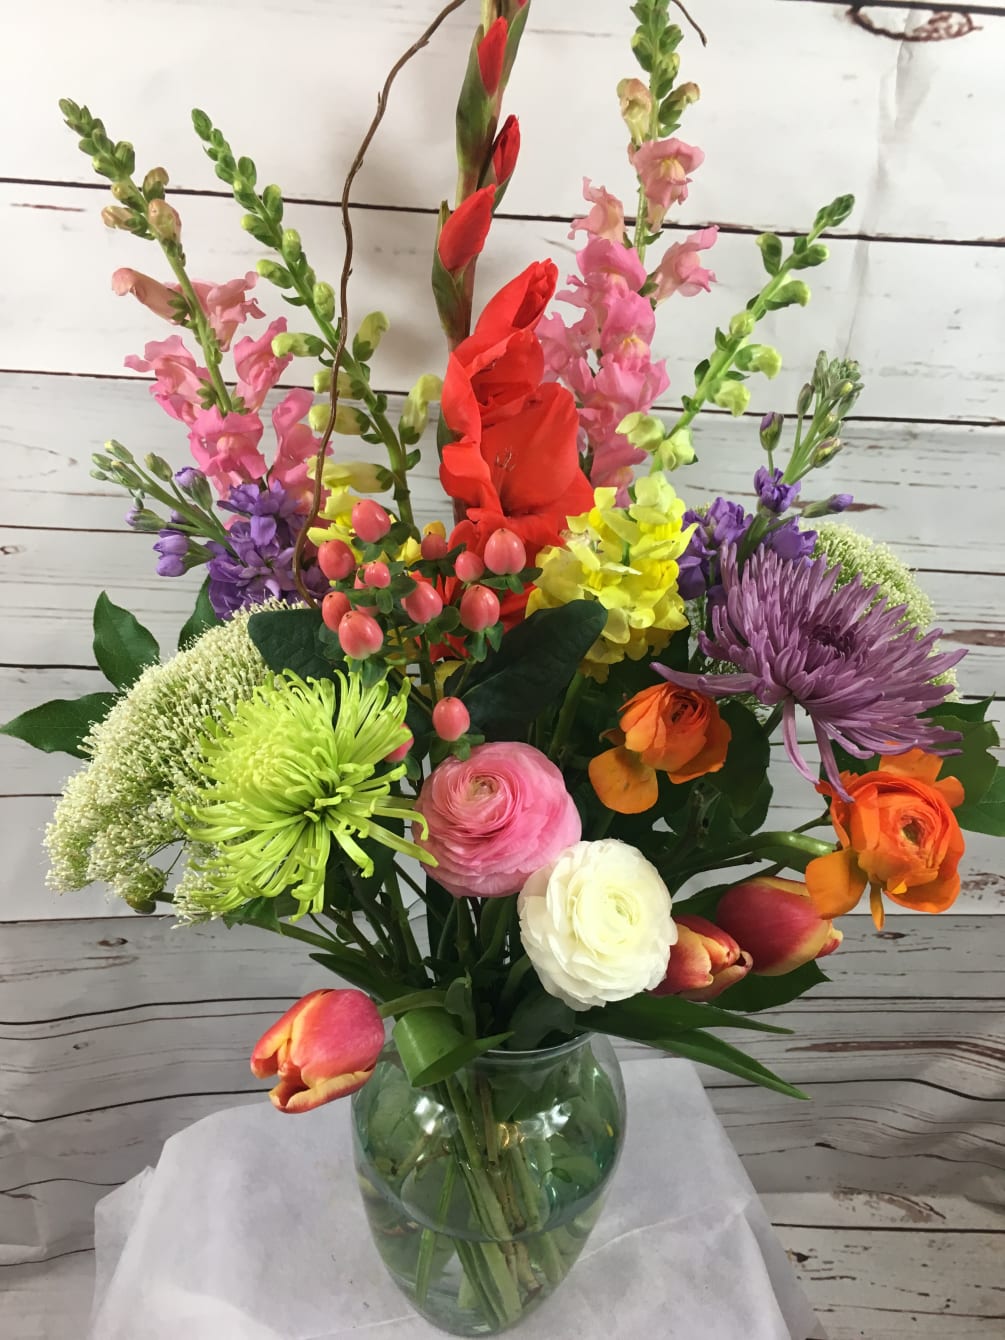 A colorful combination of spring flowers such as tulips,ranunculus,hypericum berries,gladiola,snap dragons,spider mums